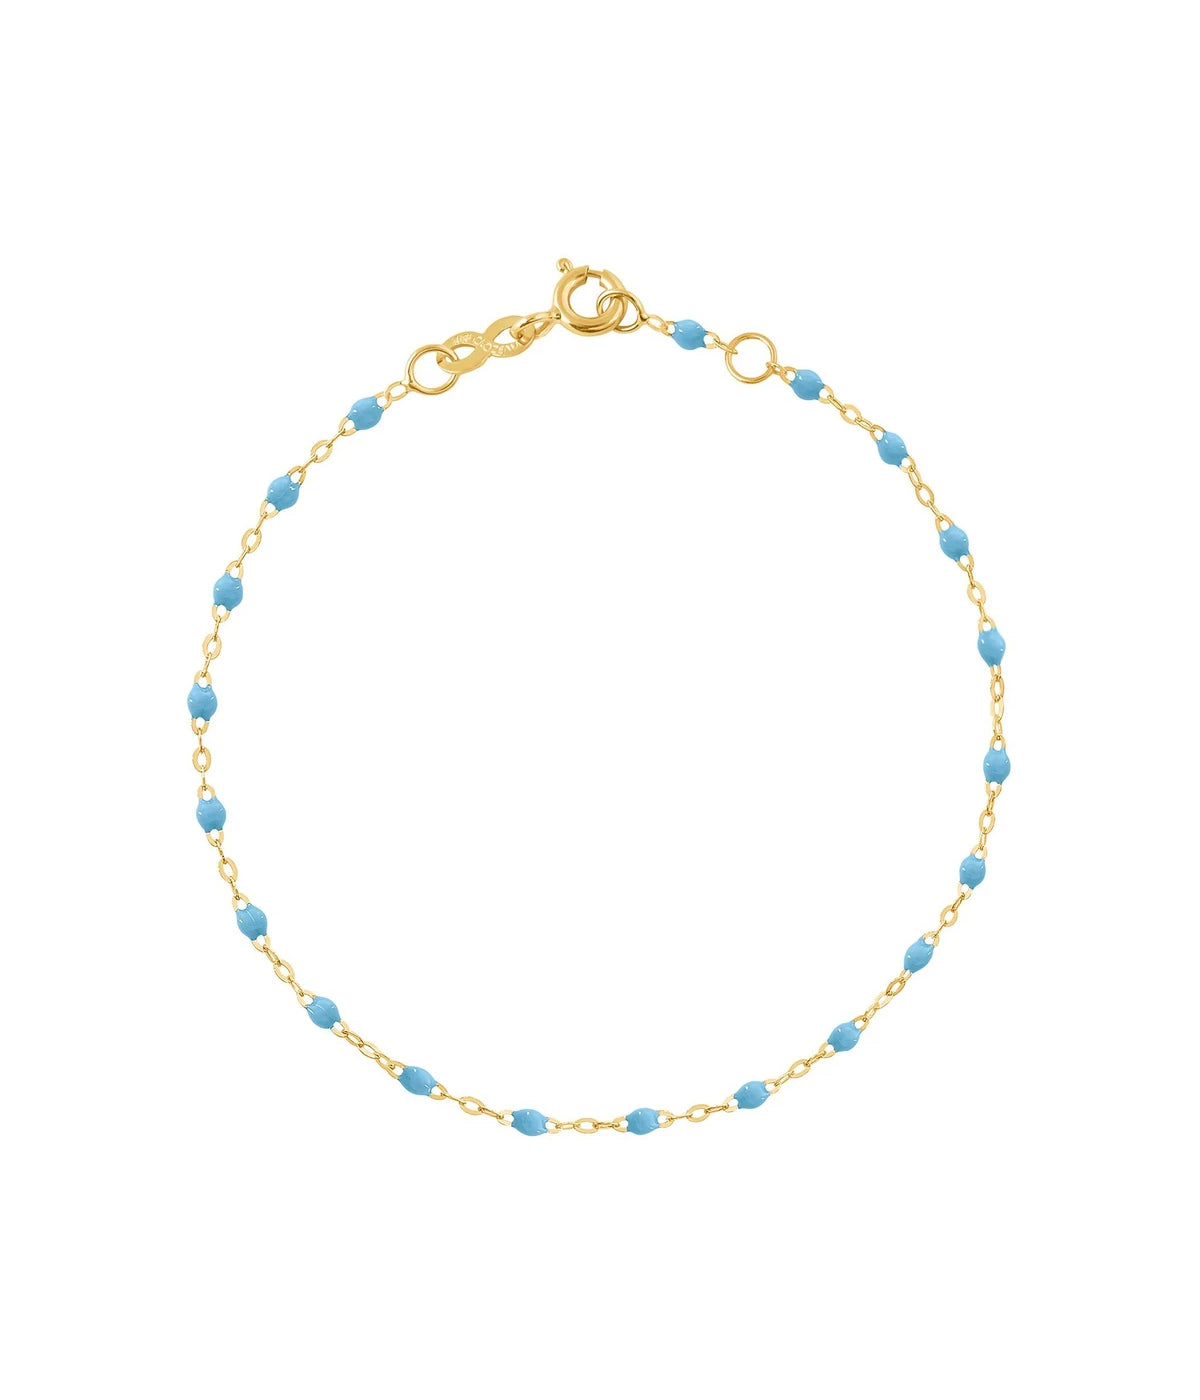 Classic 17cm Bracelet in 18K Yellow Gold & Turquoise